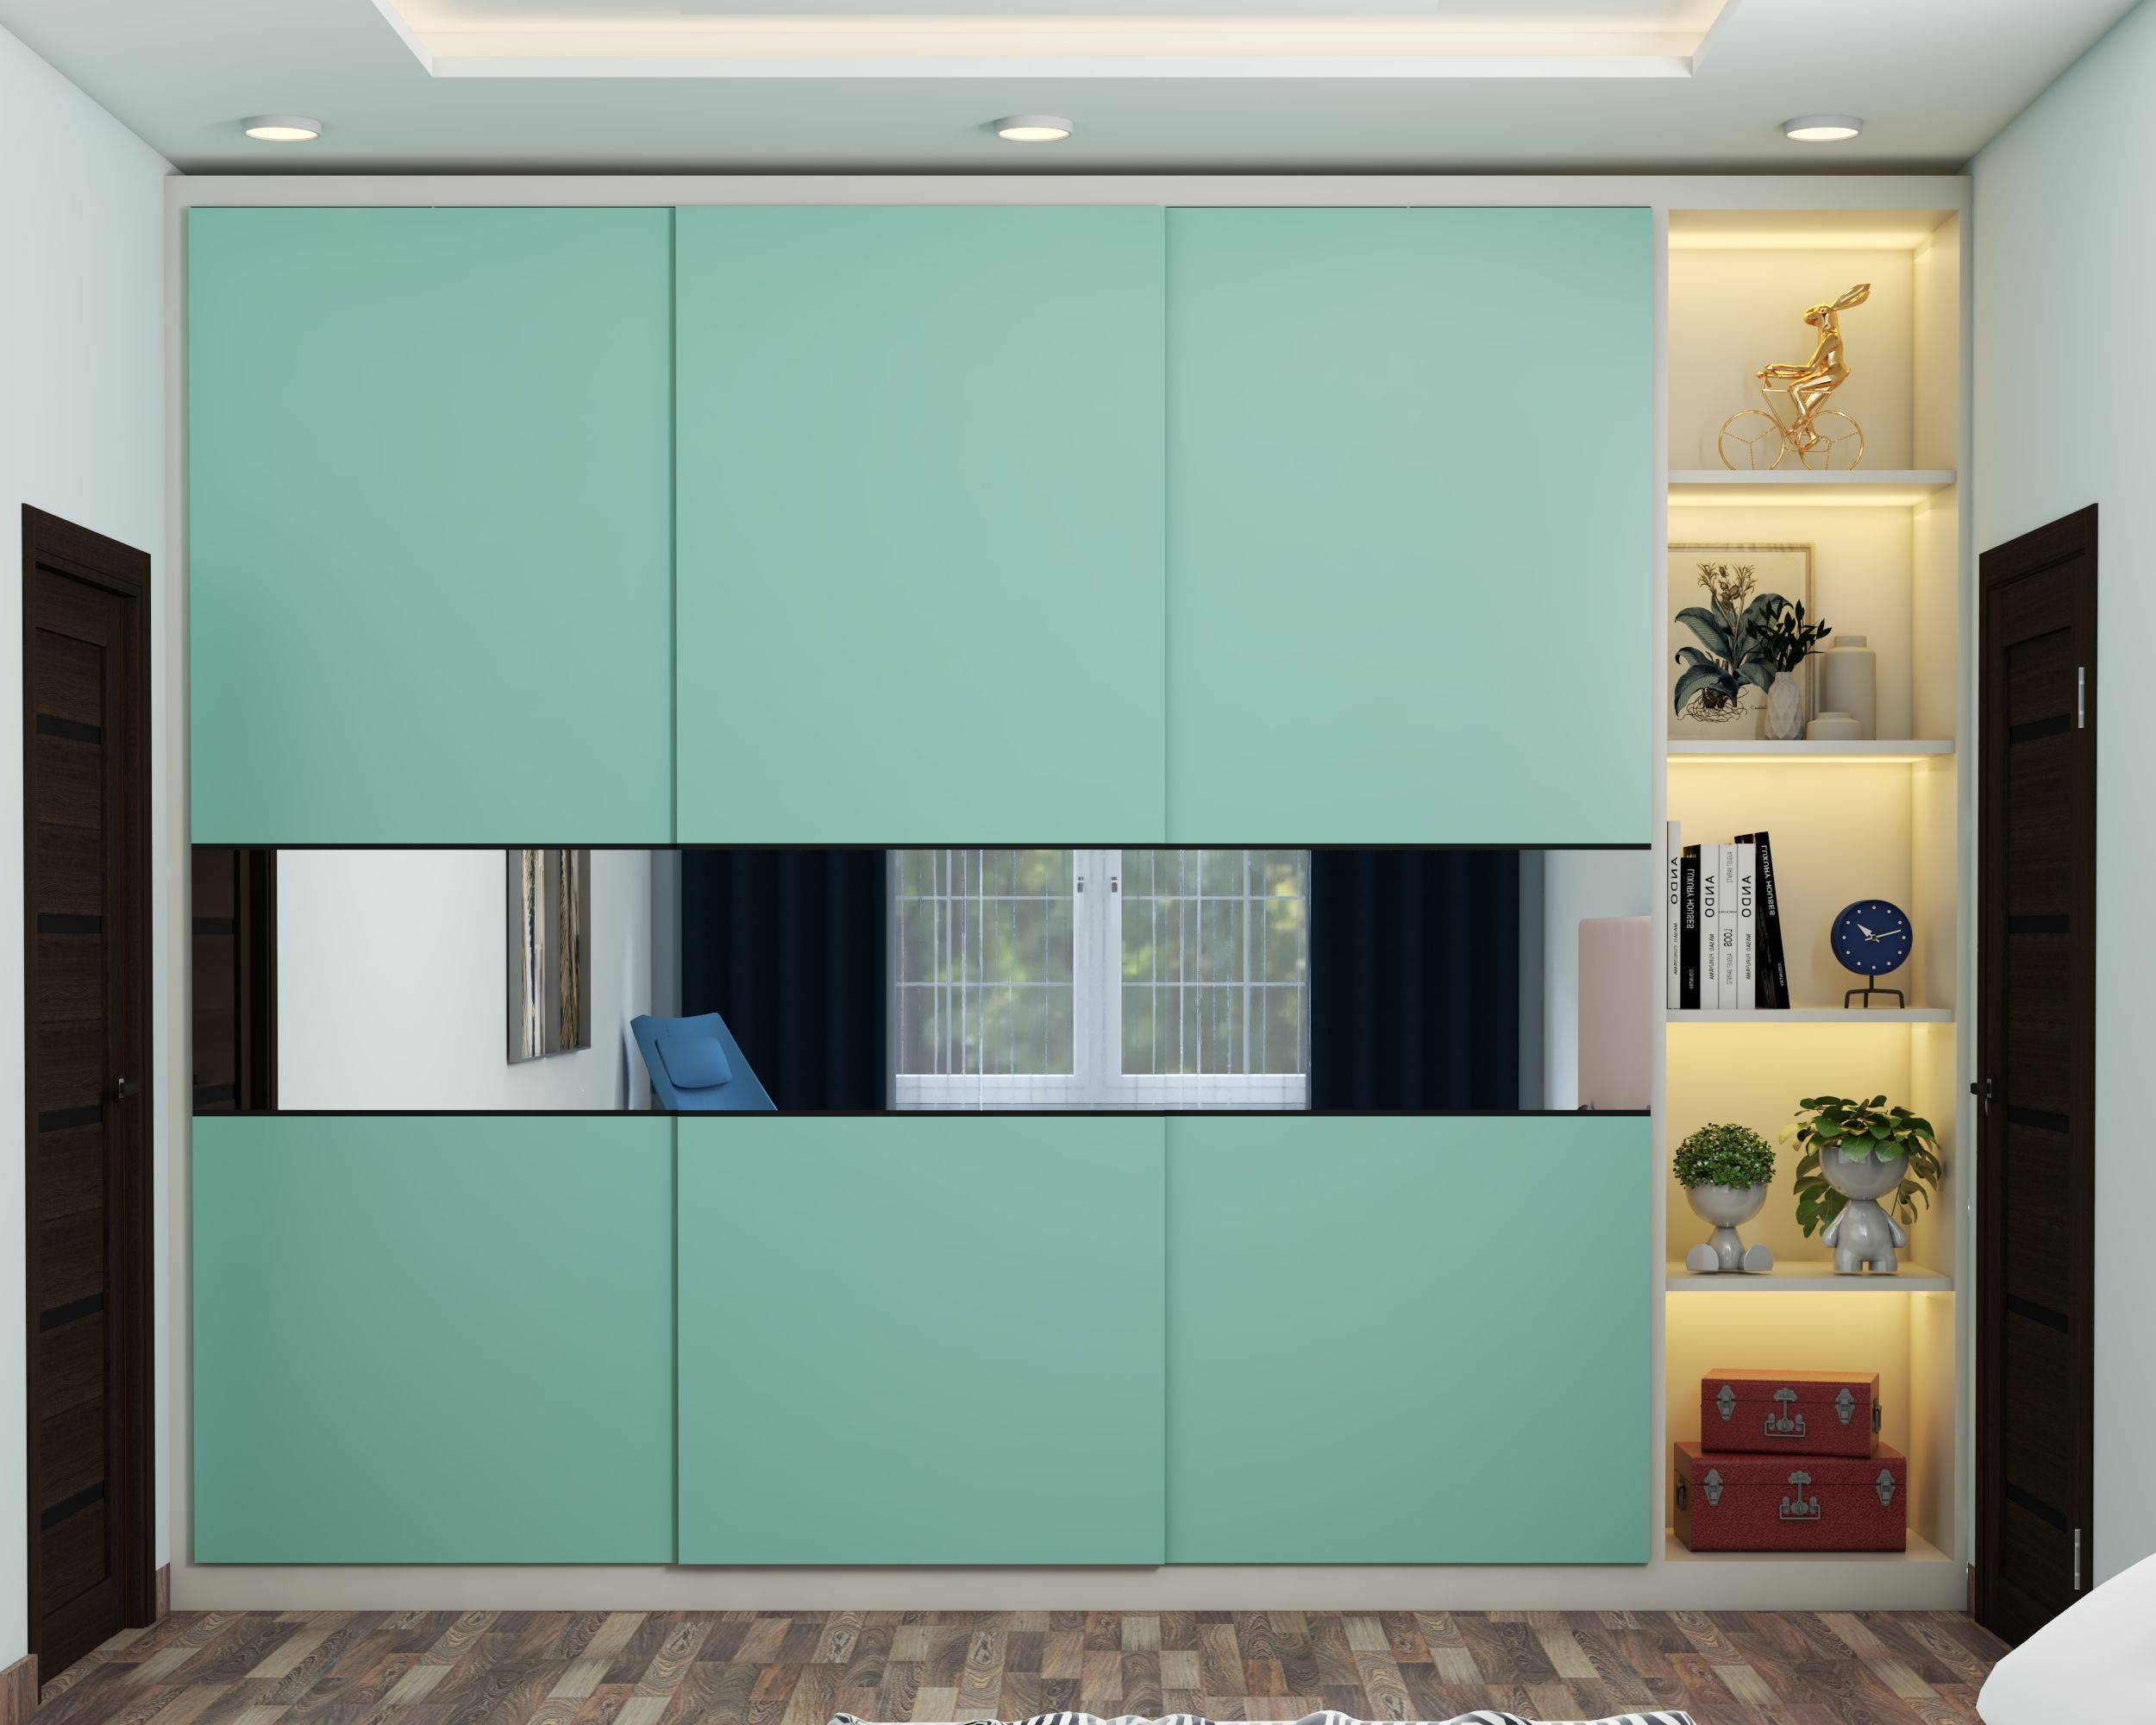 Cyan Toned Contemporary Style Wardrobe Design With Sliding Doors